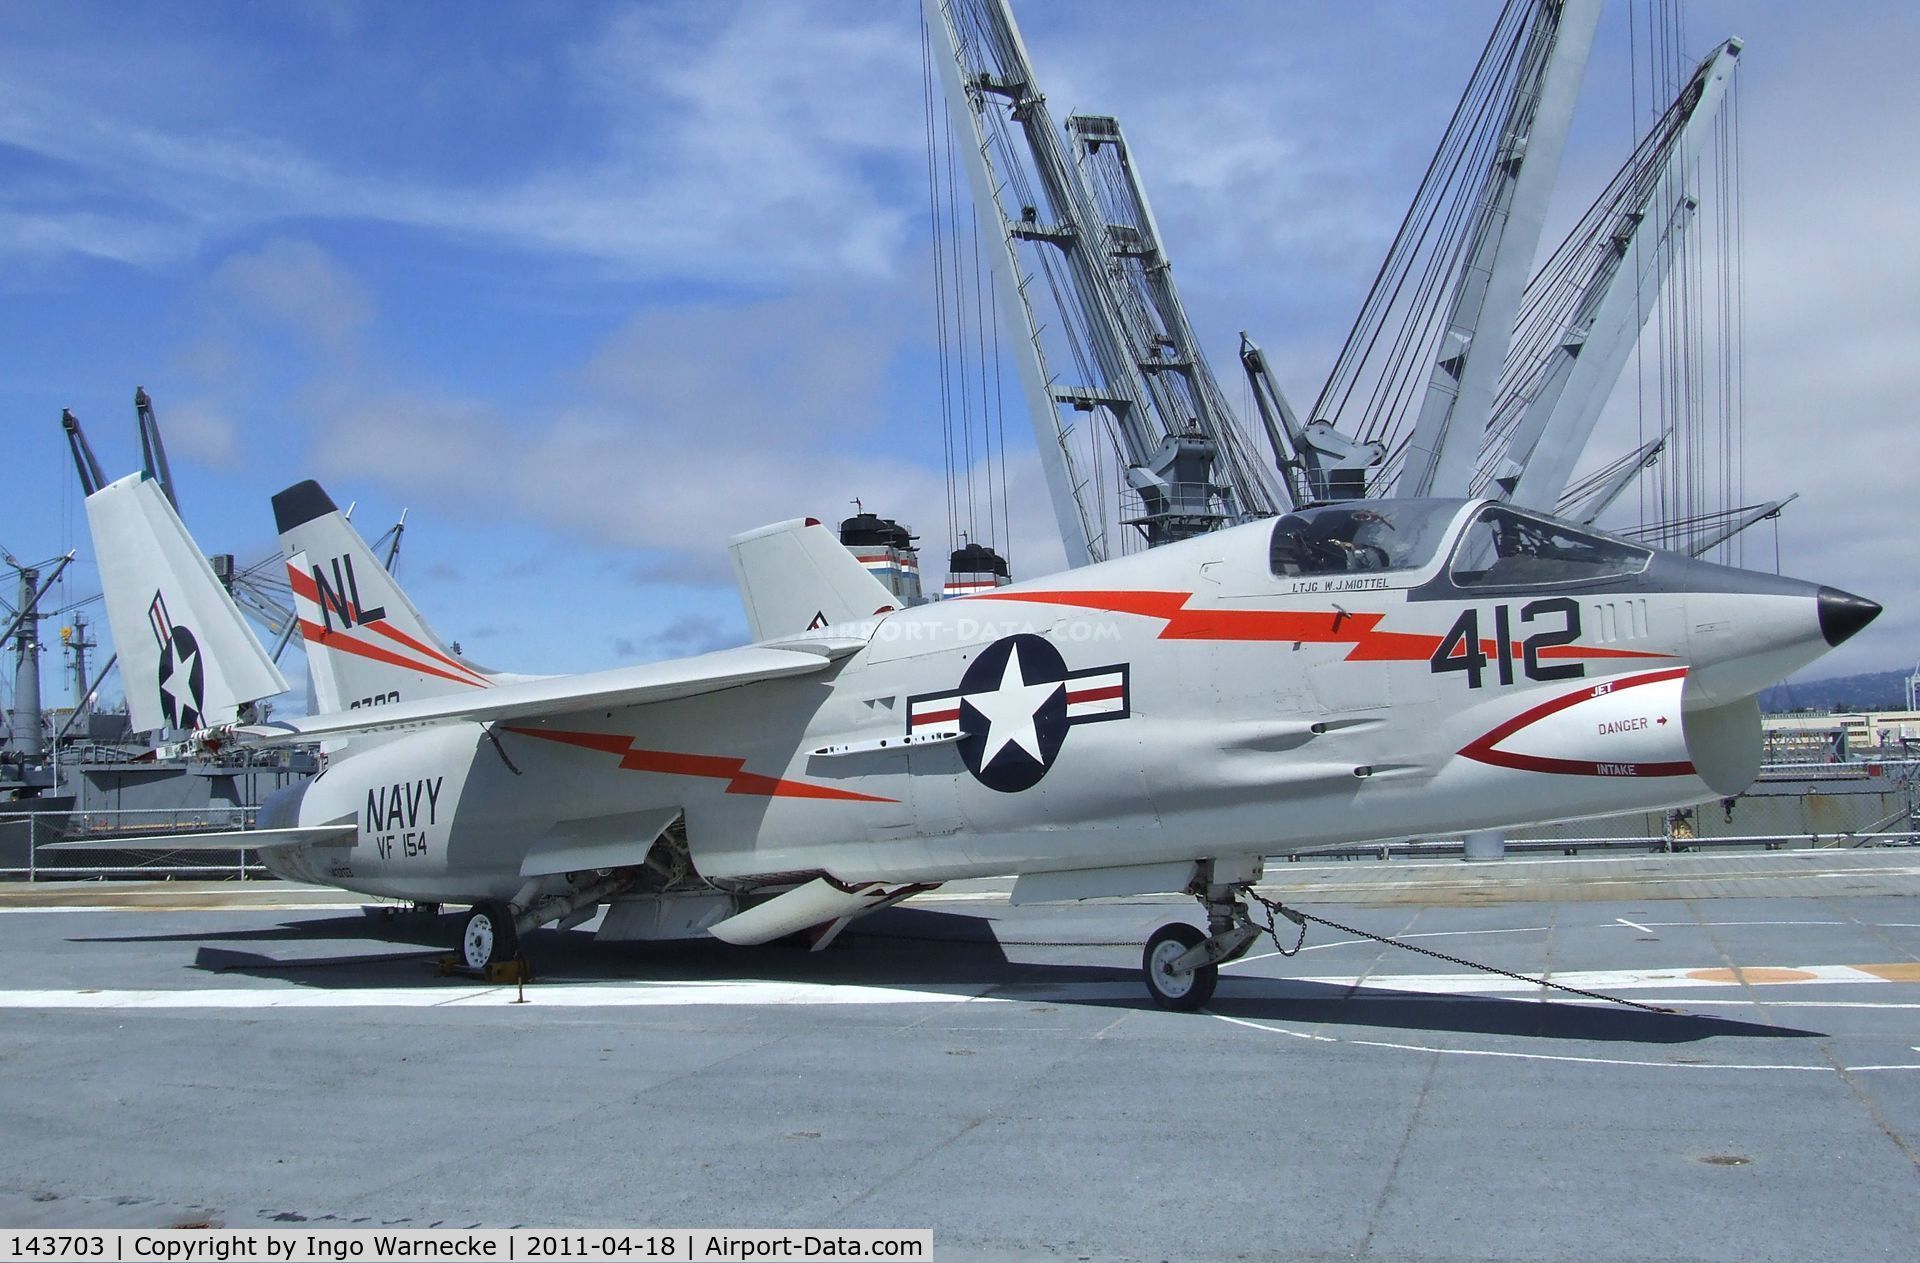 143703, Vought F-8A Crusader C/N Not found 143703, Vought F-8A Crusader at the USS Hornet Museum, Alameda CA